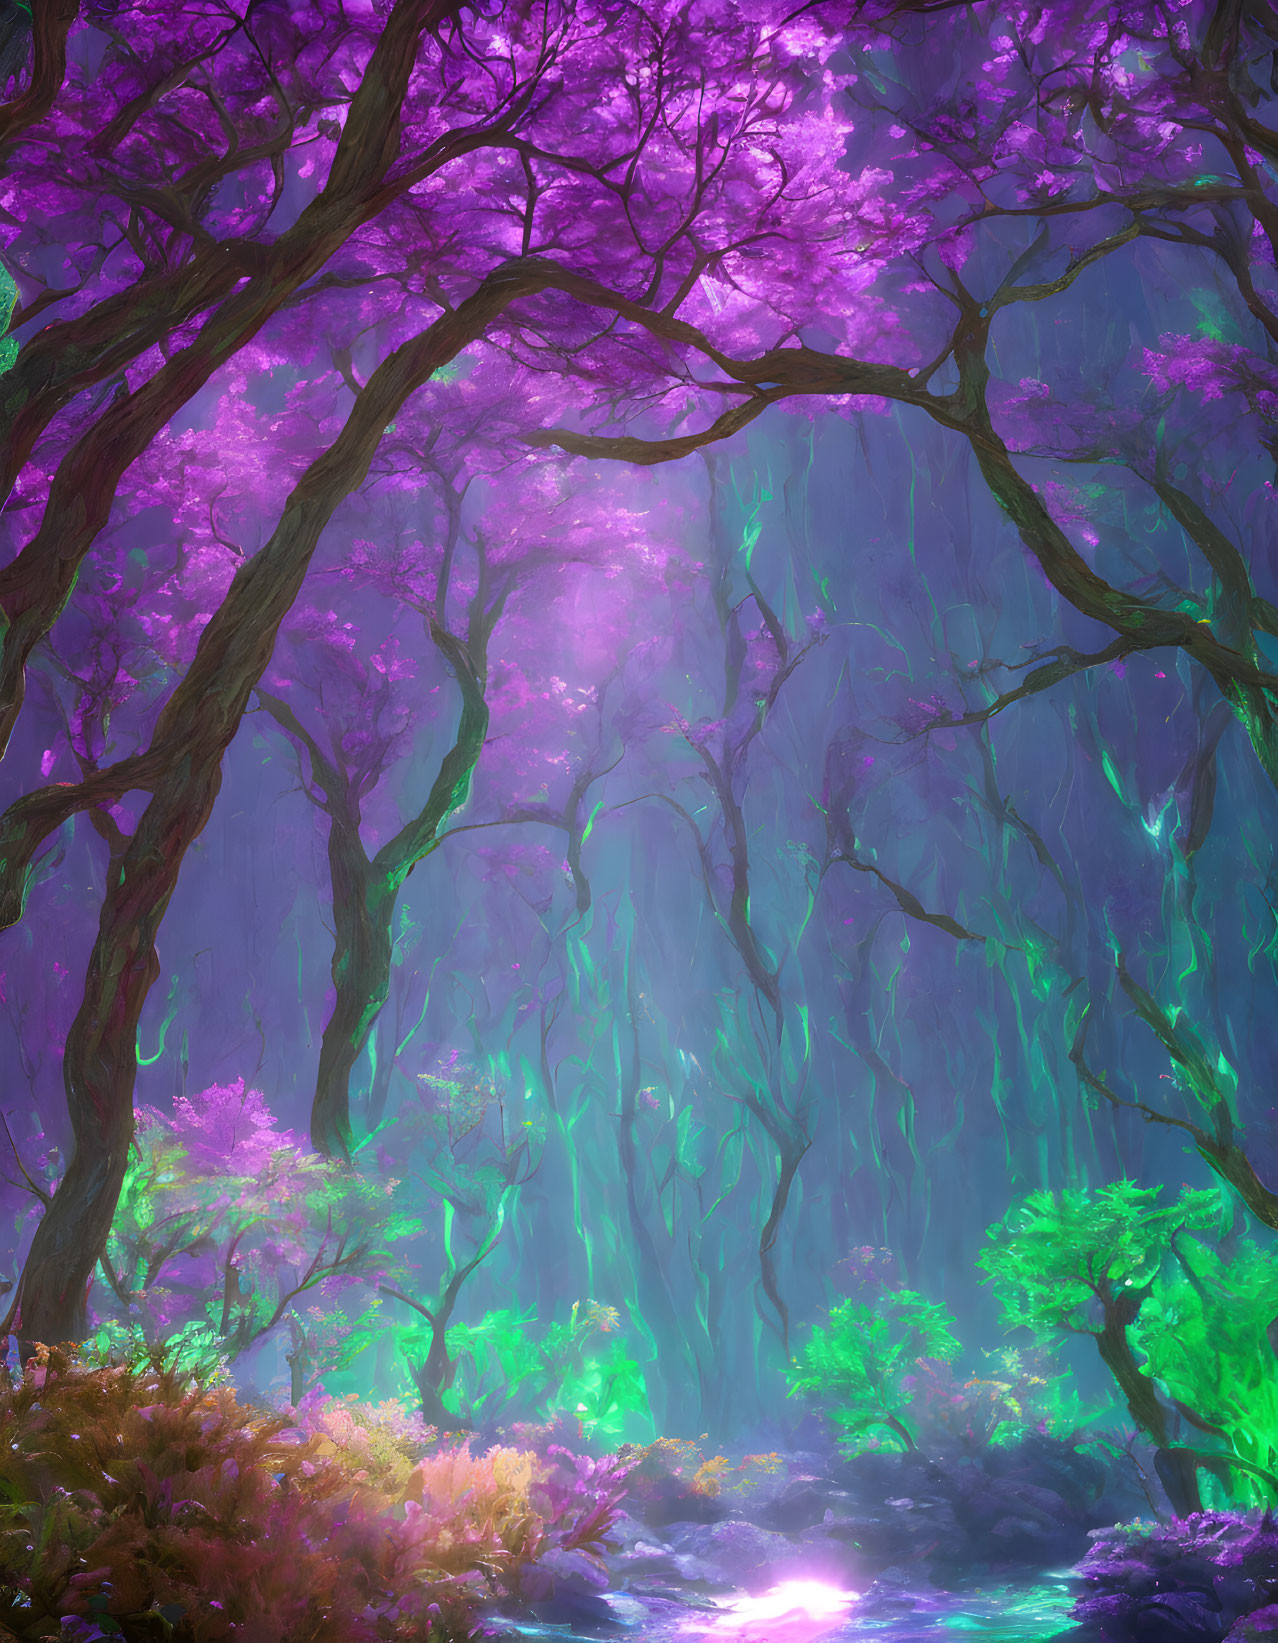 Mystical forest with vibrant purple foliage and magical light